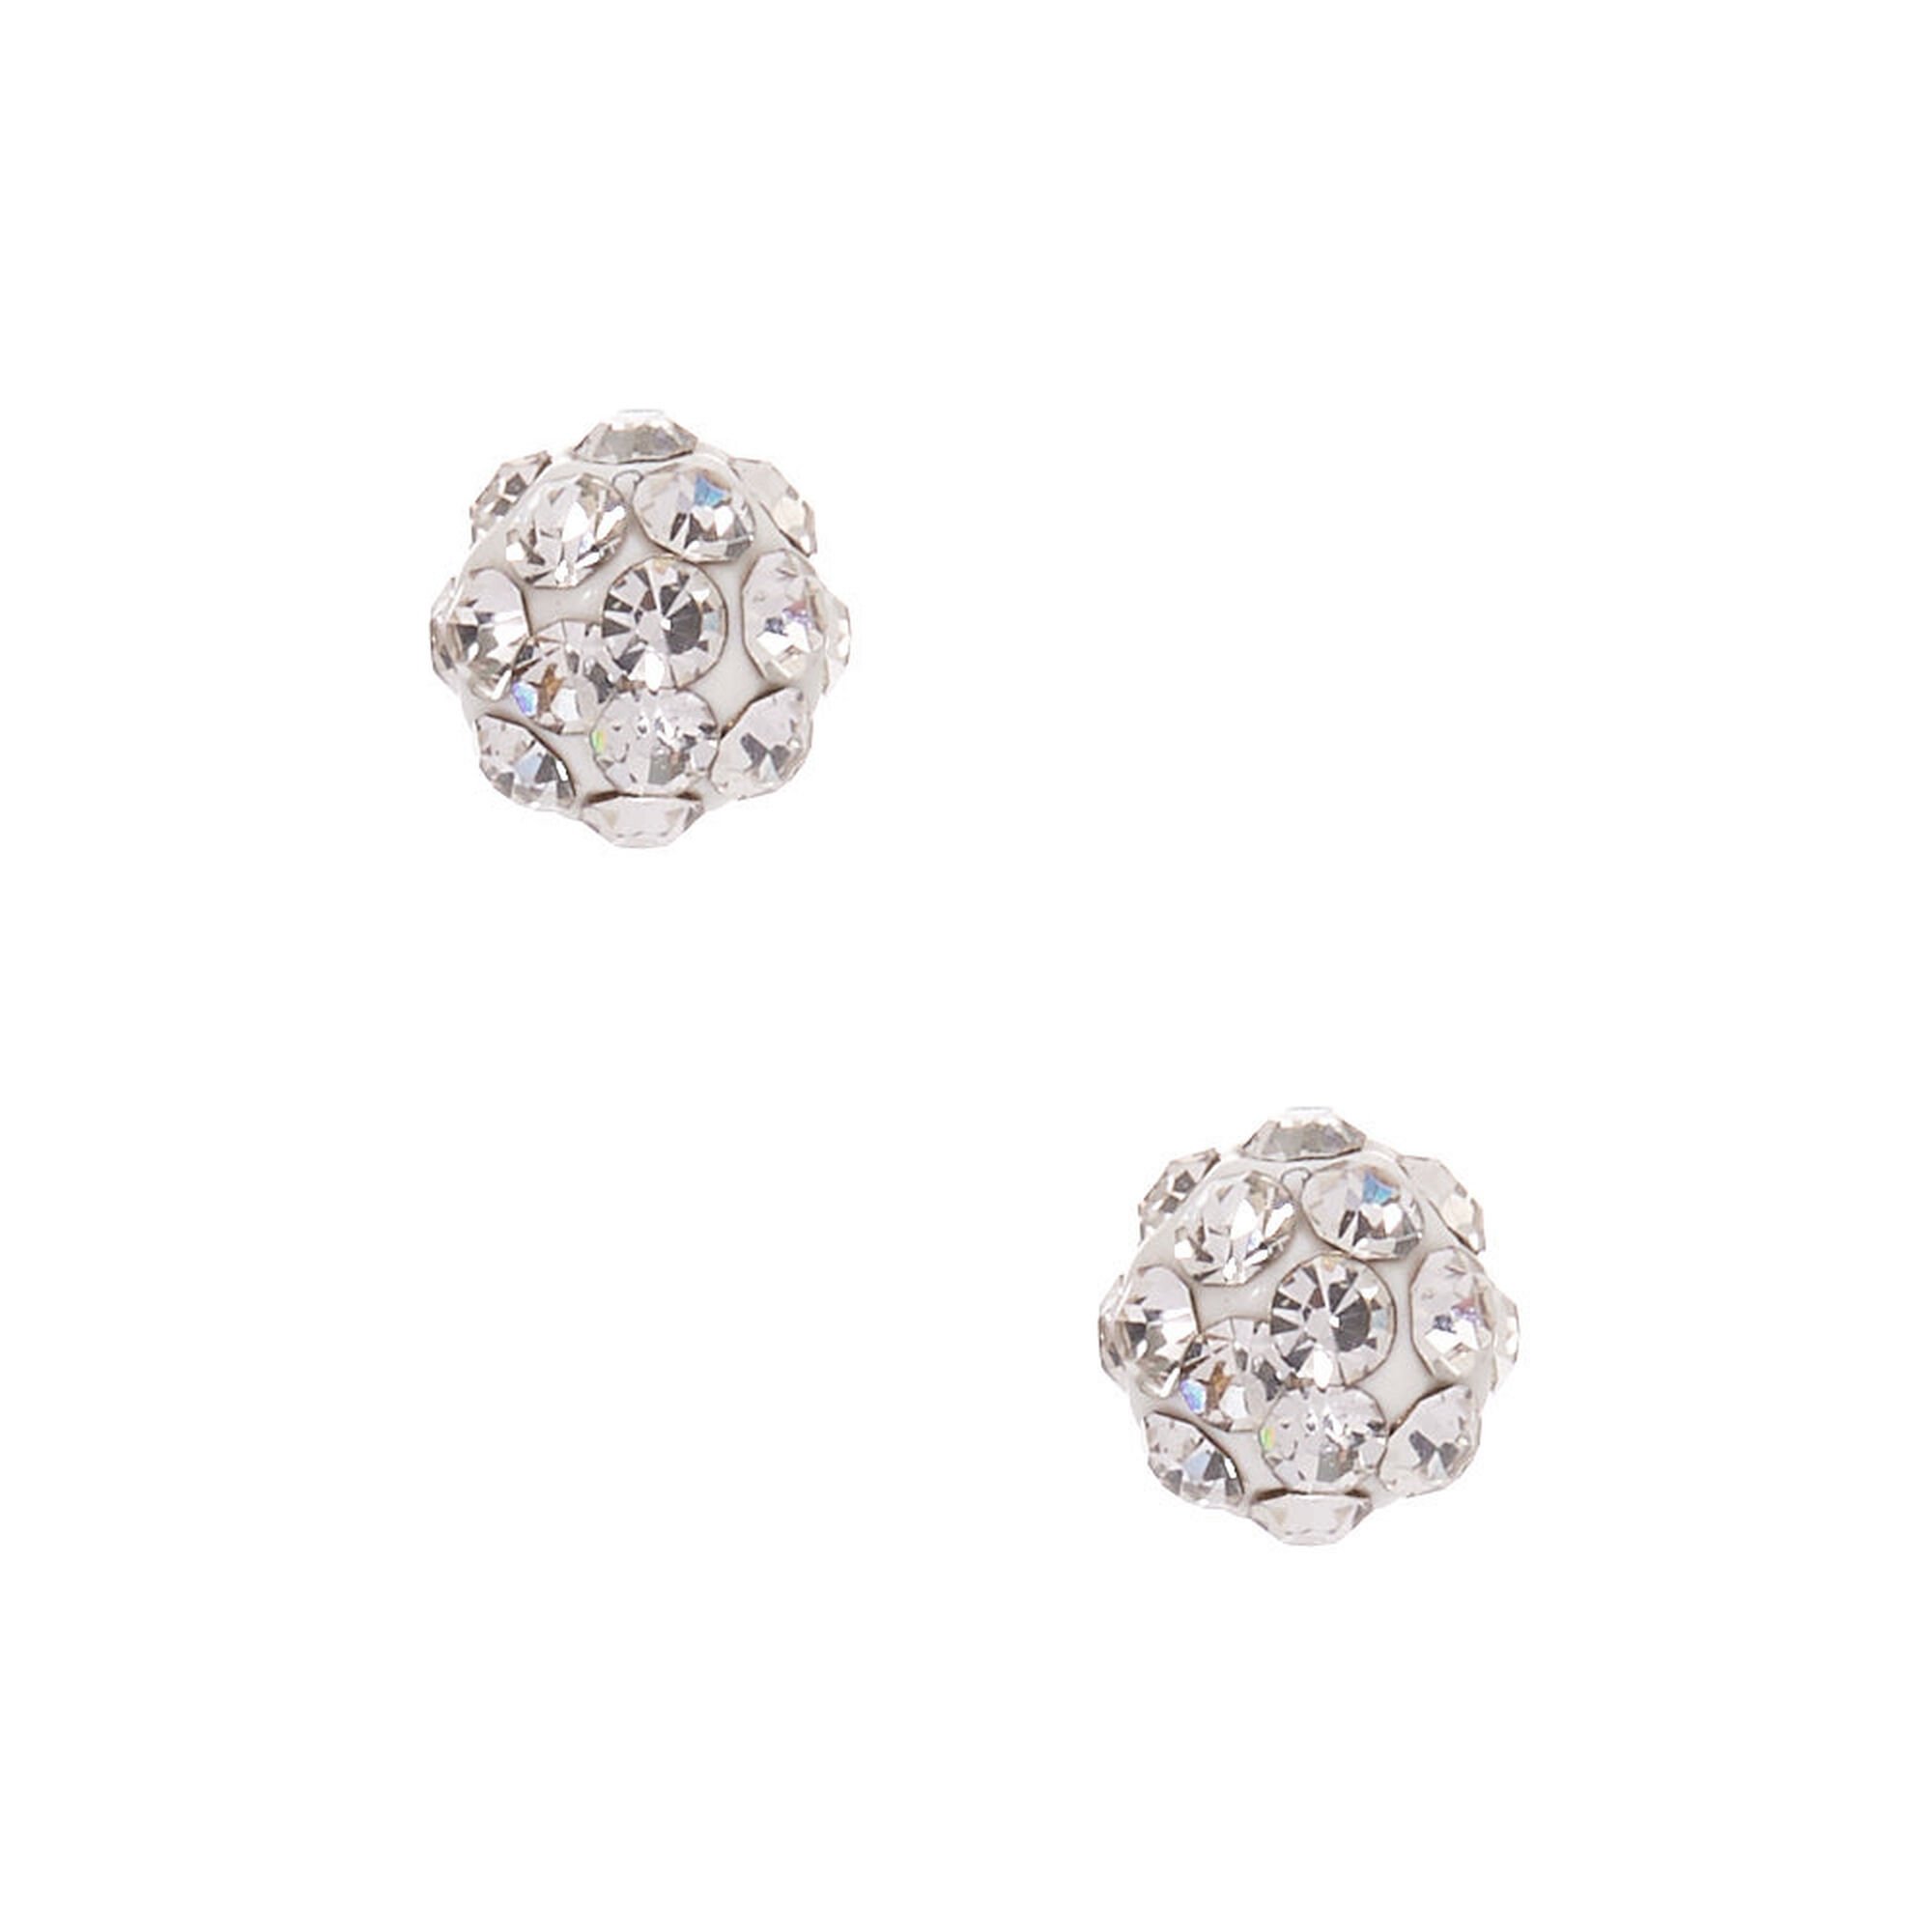 View Claires Silver Titanium 5MM Fireball Stud Earrings White information